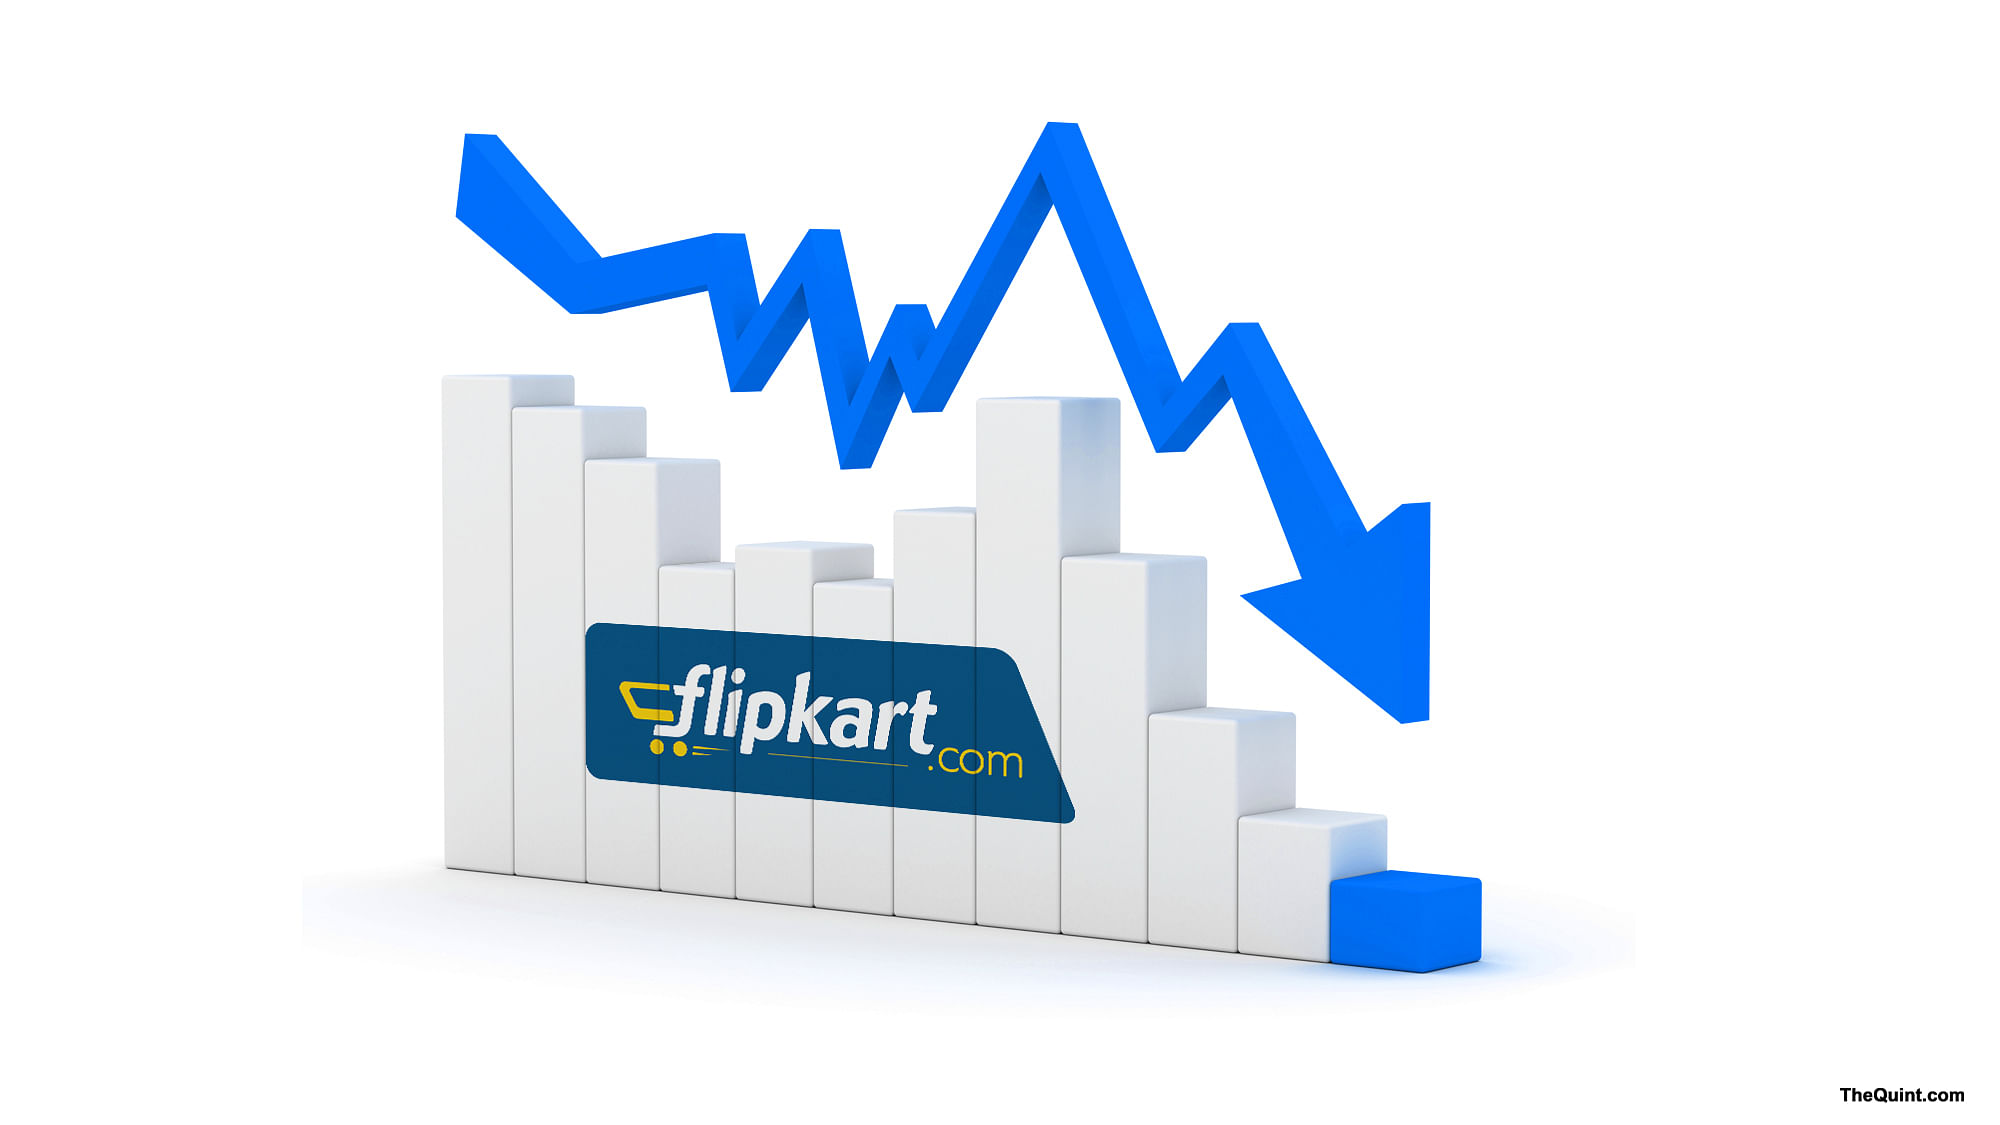 Flipkart’s devaluation threatens to put a dampener on India’s entire e-commerce market. (Photo: <b>The Quint</b>)